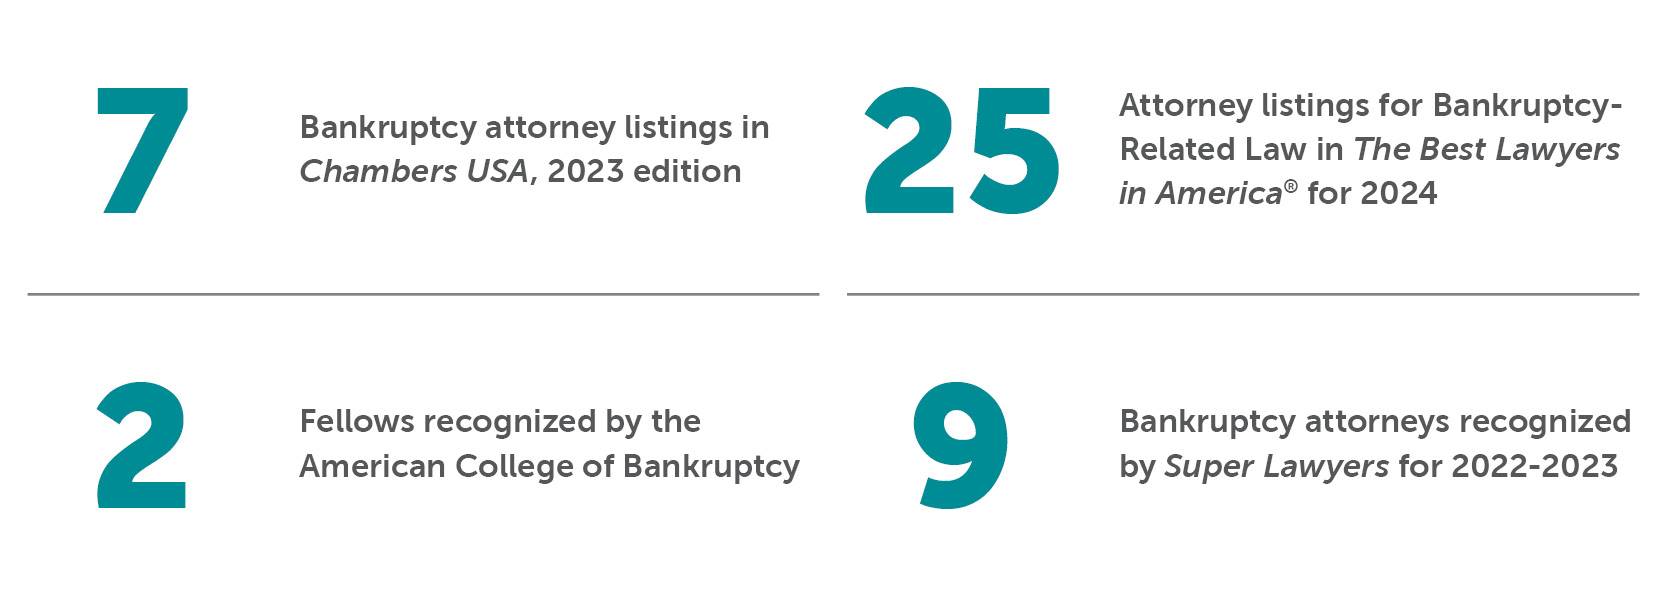 Bradley By The Numbers Bankruptcy & Creditors' Rights